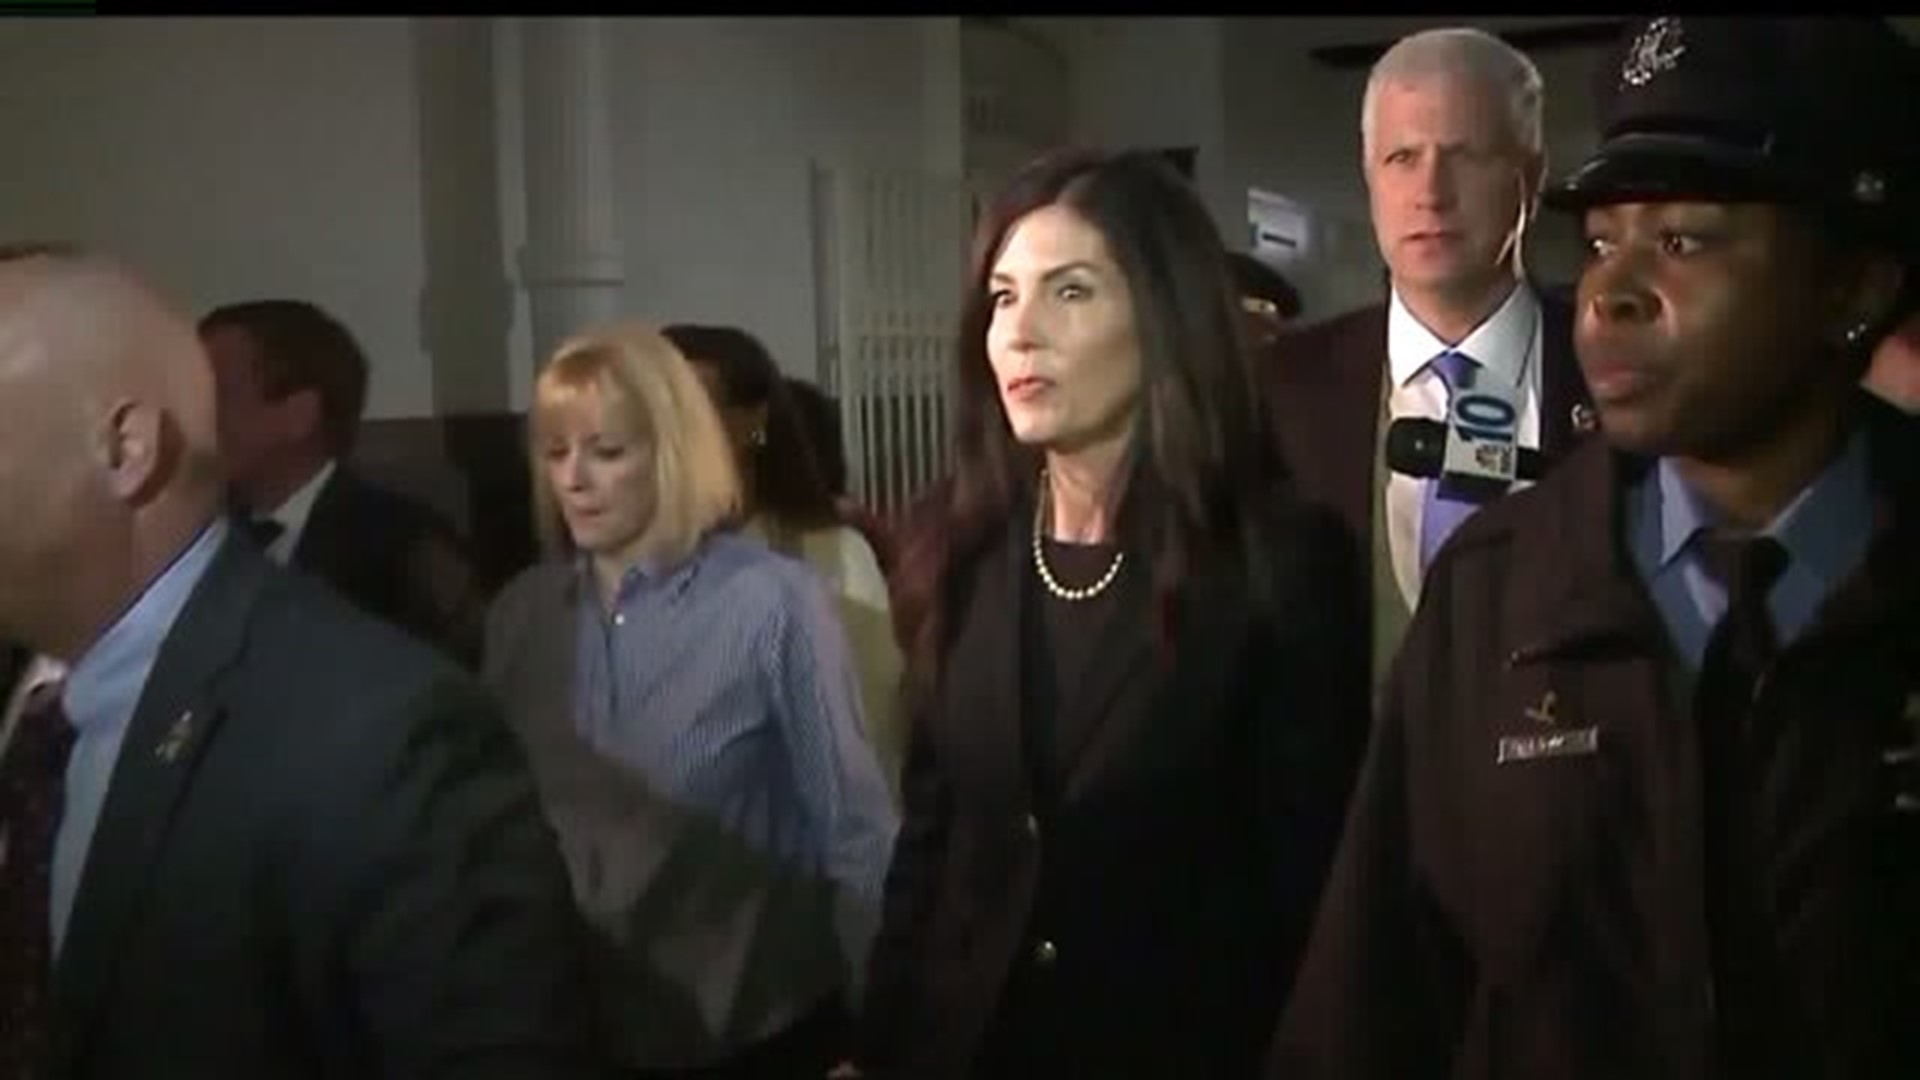 State Attorney General Kathleen Kane files a motion of reinstatement as a senate hearing gets underway that could remove her from office